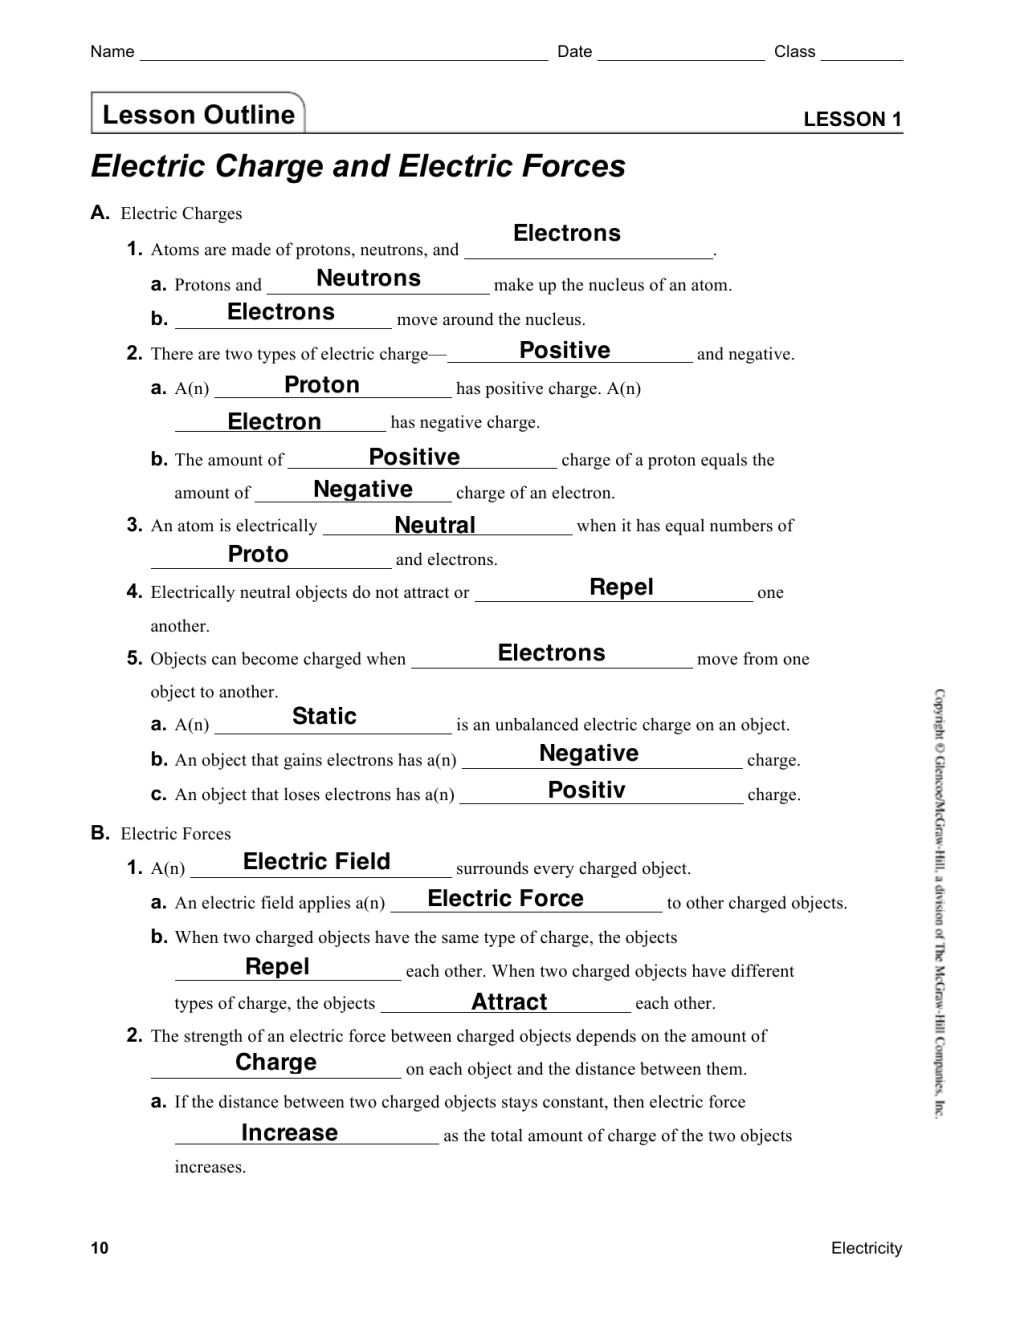 Picture of: Electric Charges